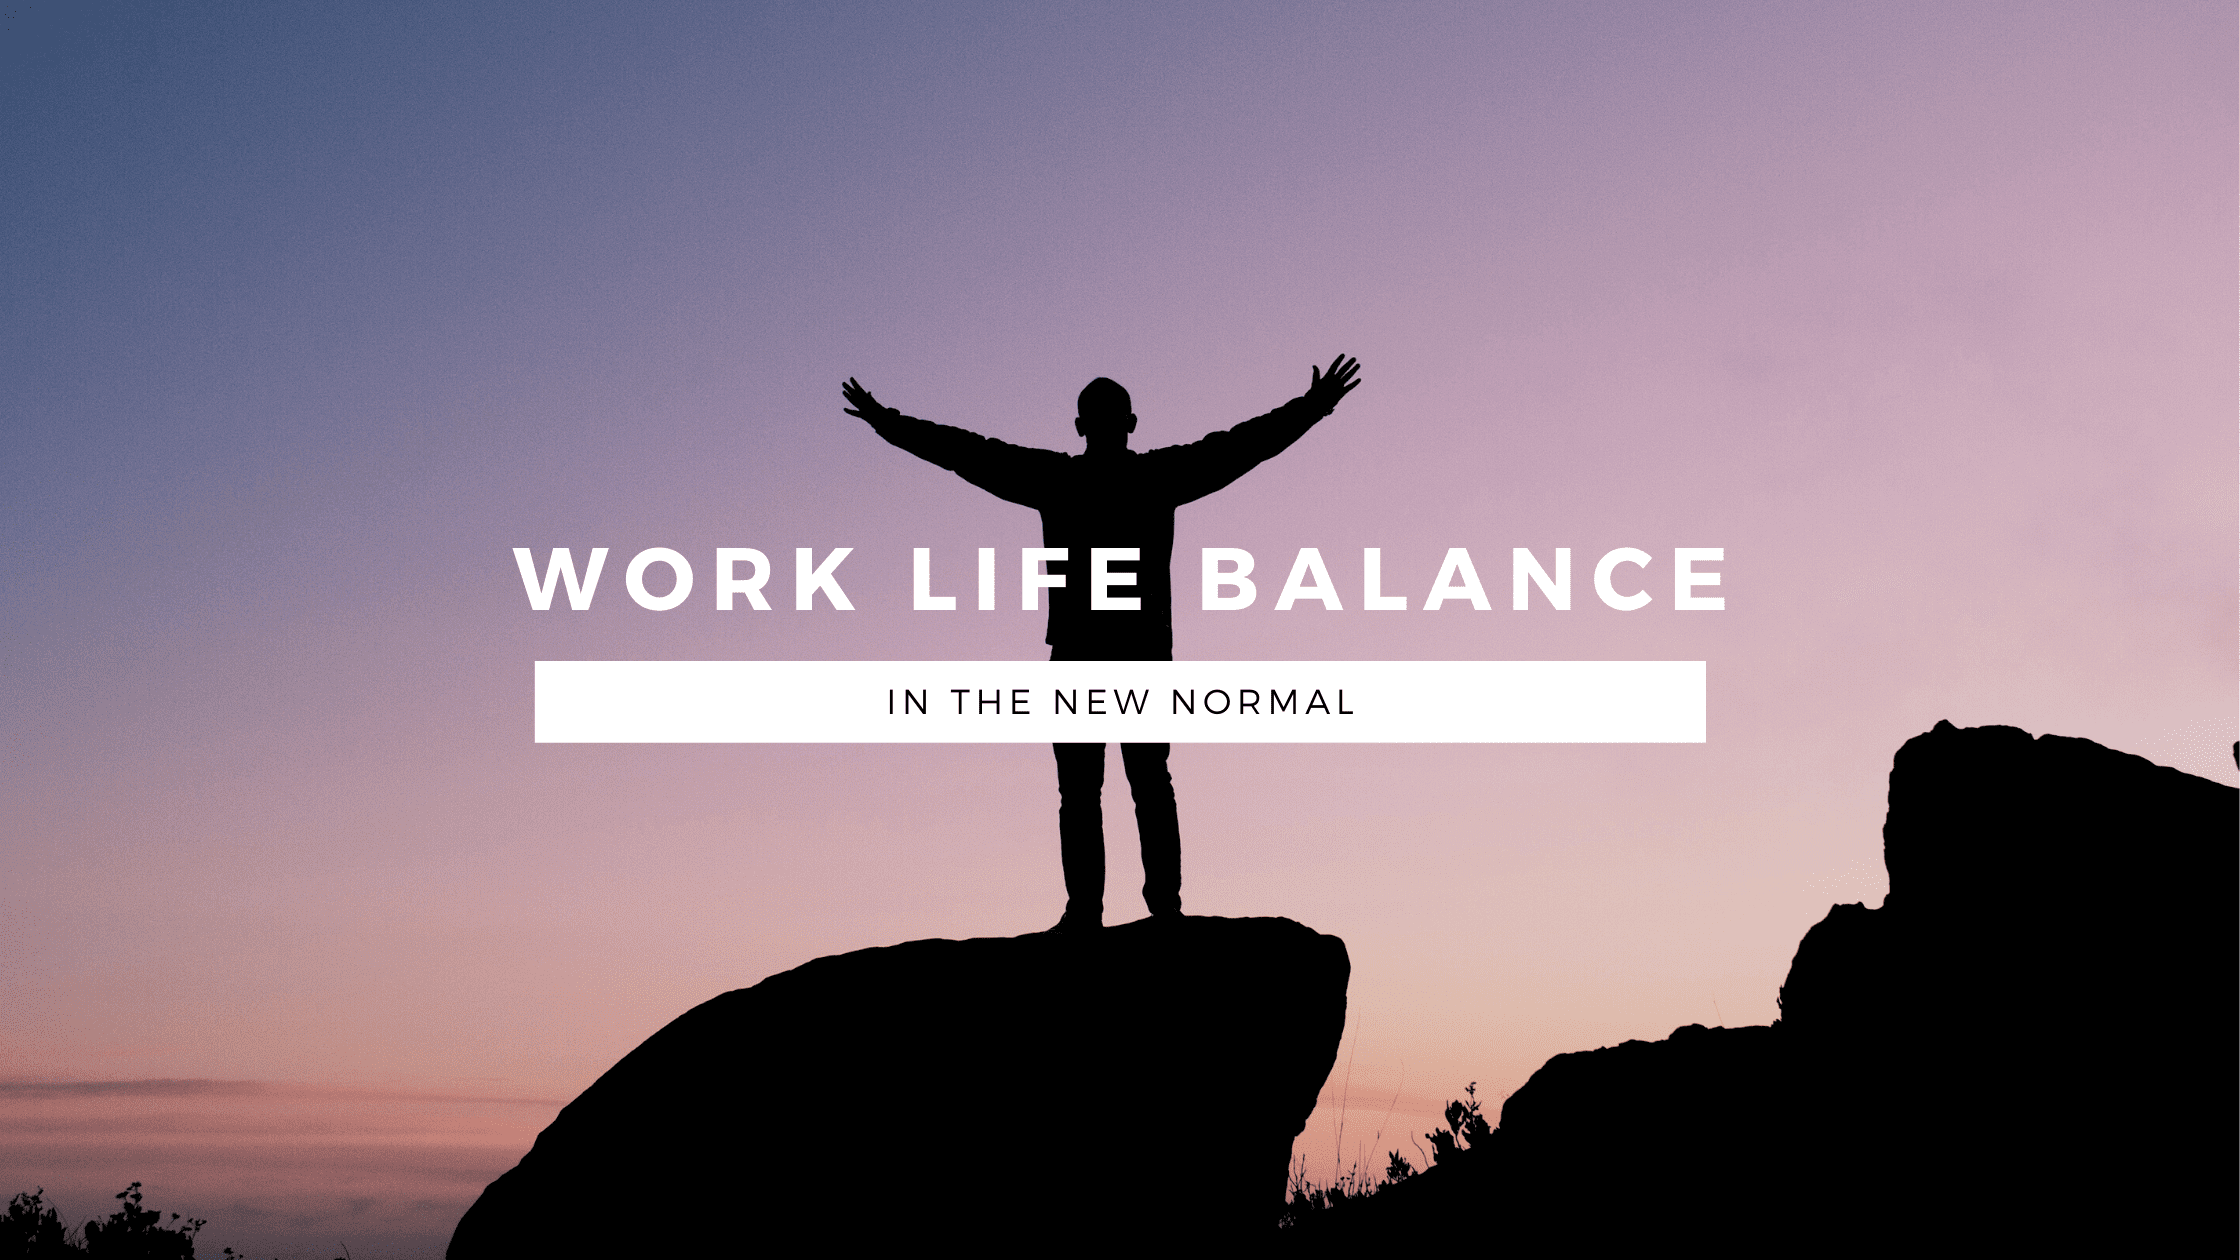 How to Achieve Work-Life Balance in the New Normal